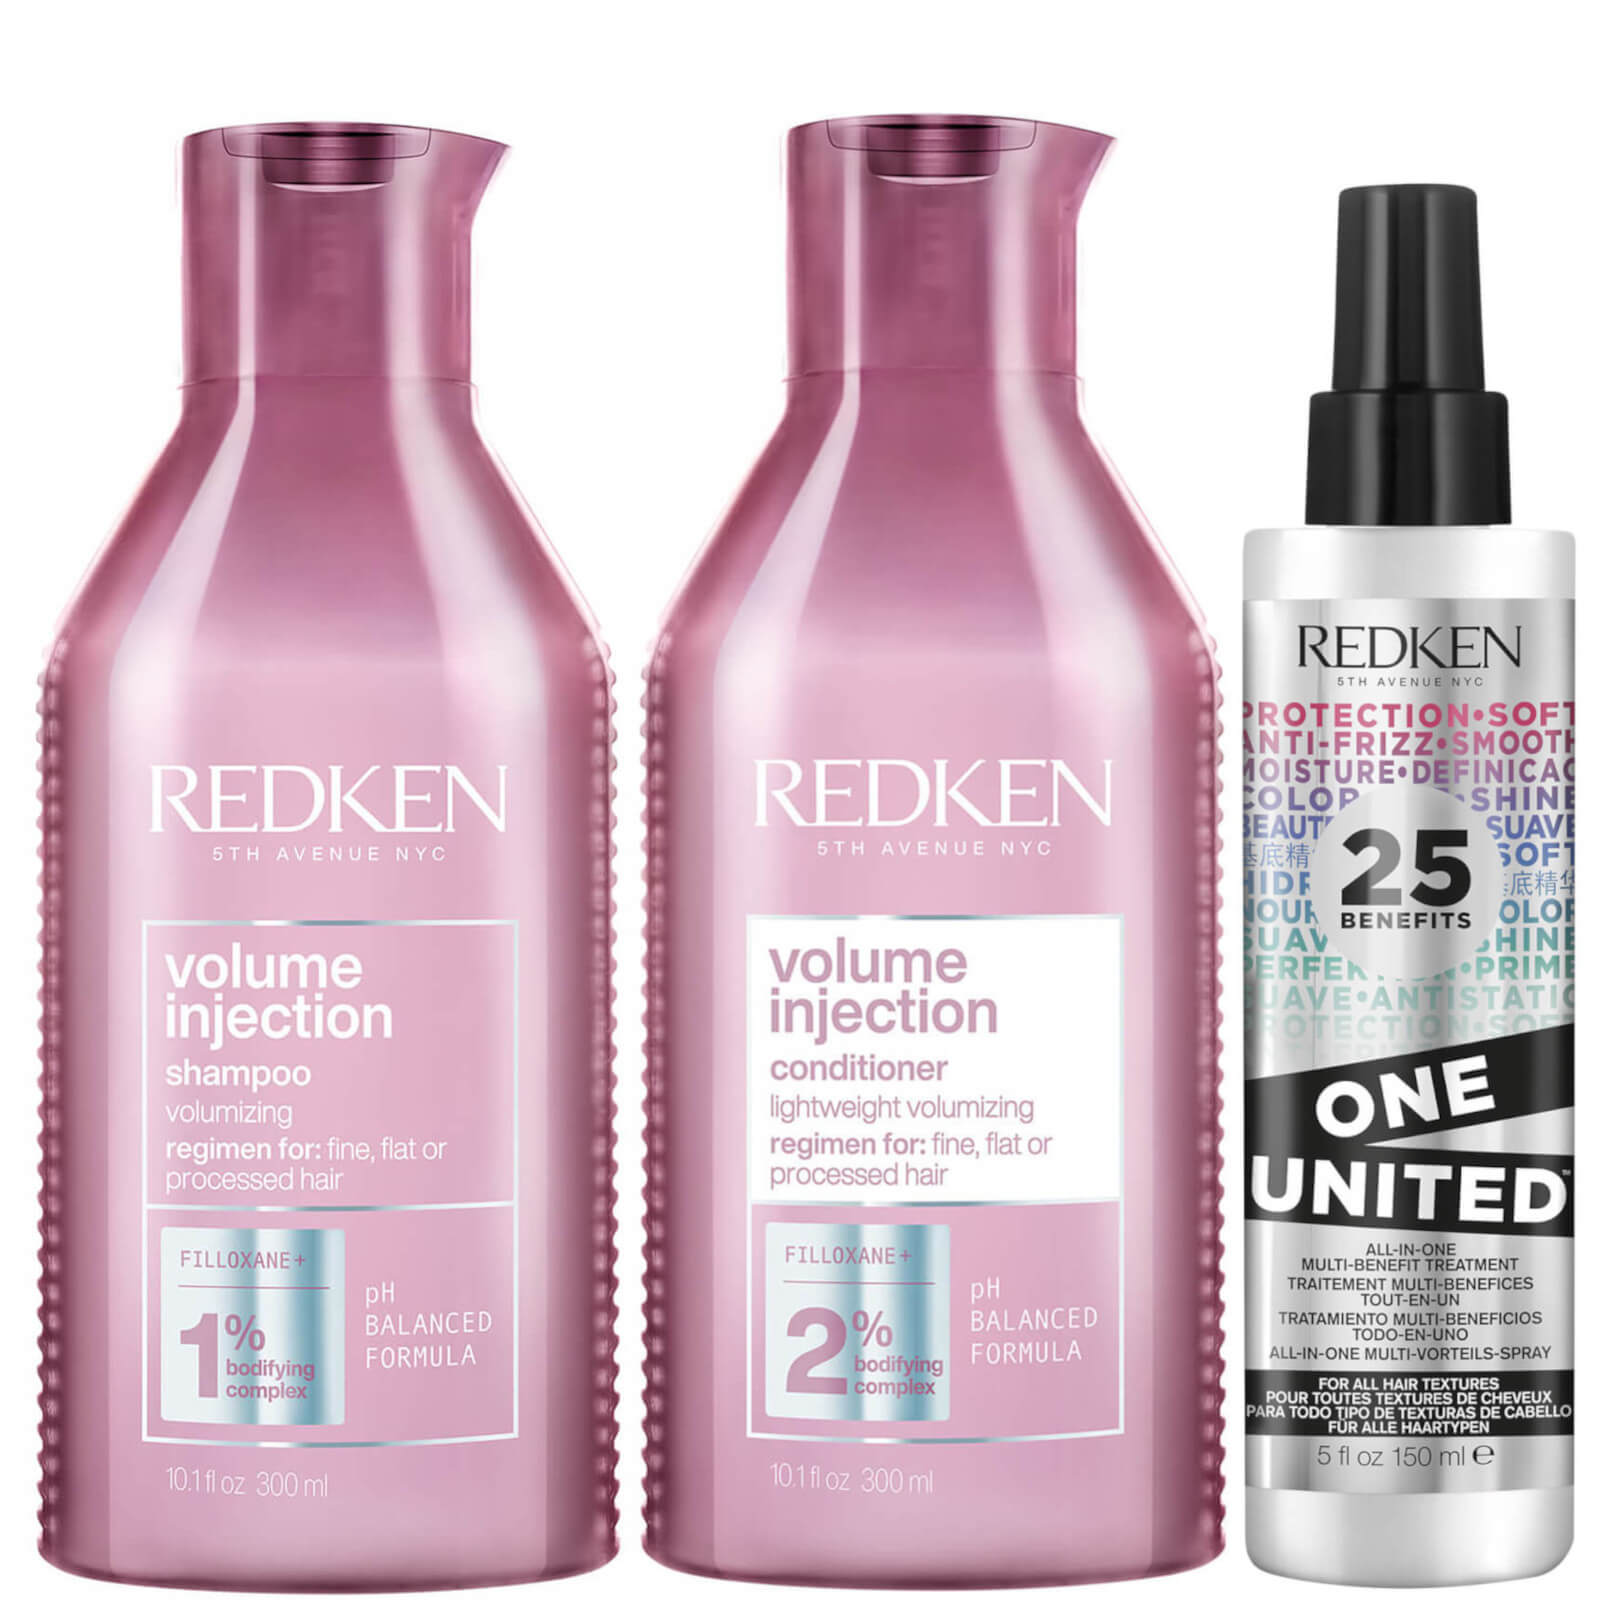 Image of Redken Volume Injection Shampoo, Conditioner and One United Treatment Spray Routine for Fine/Flat Hair